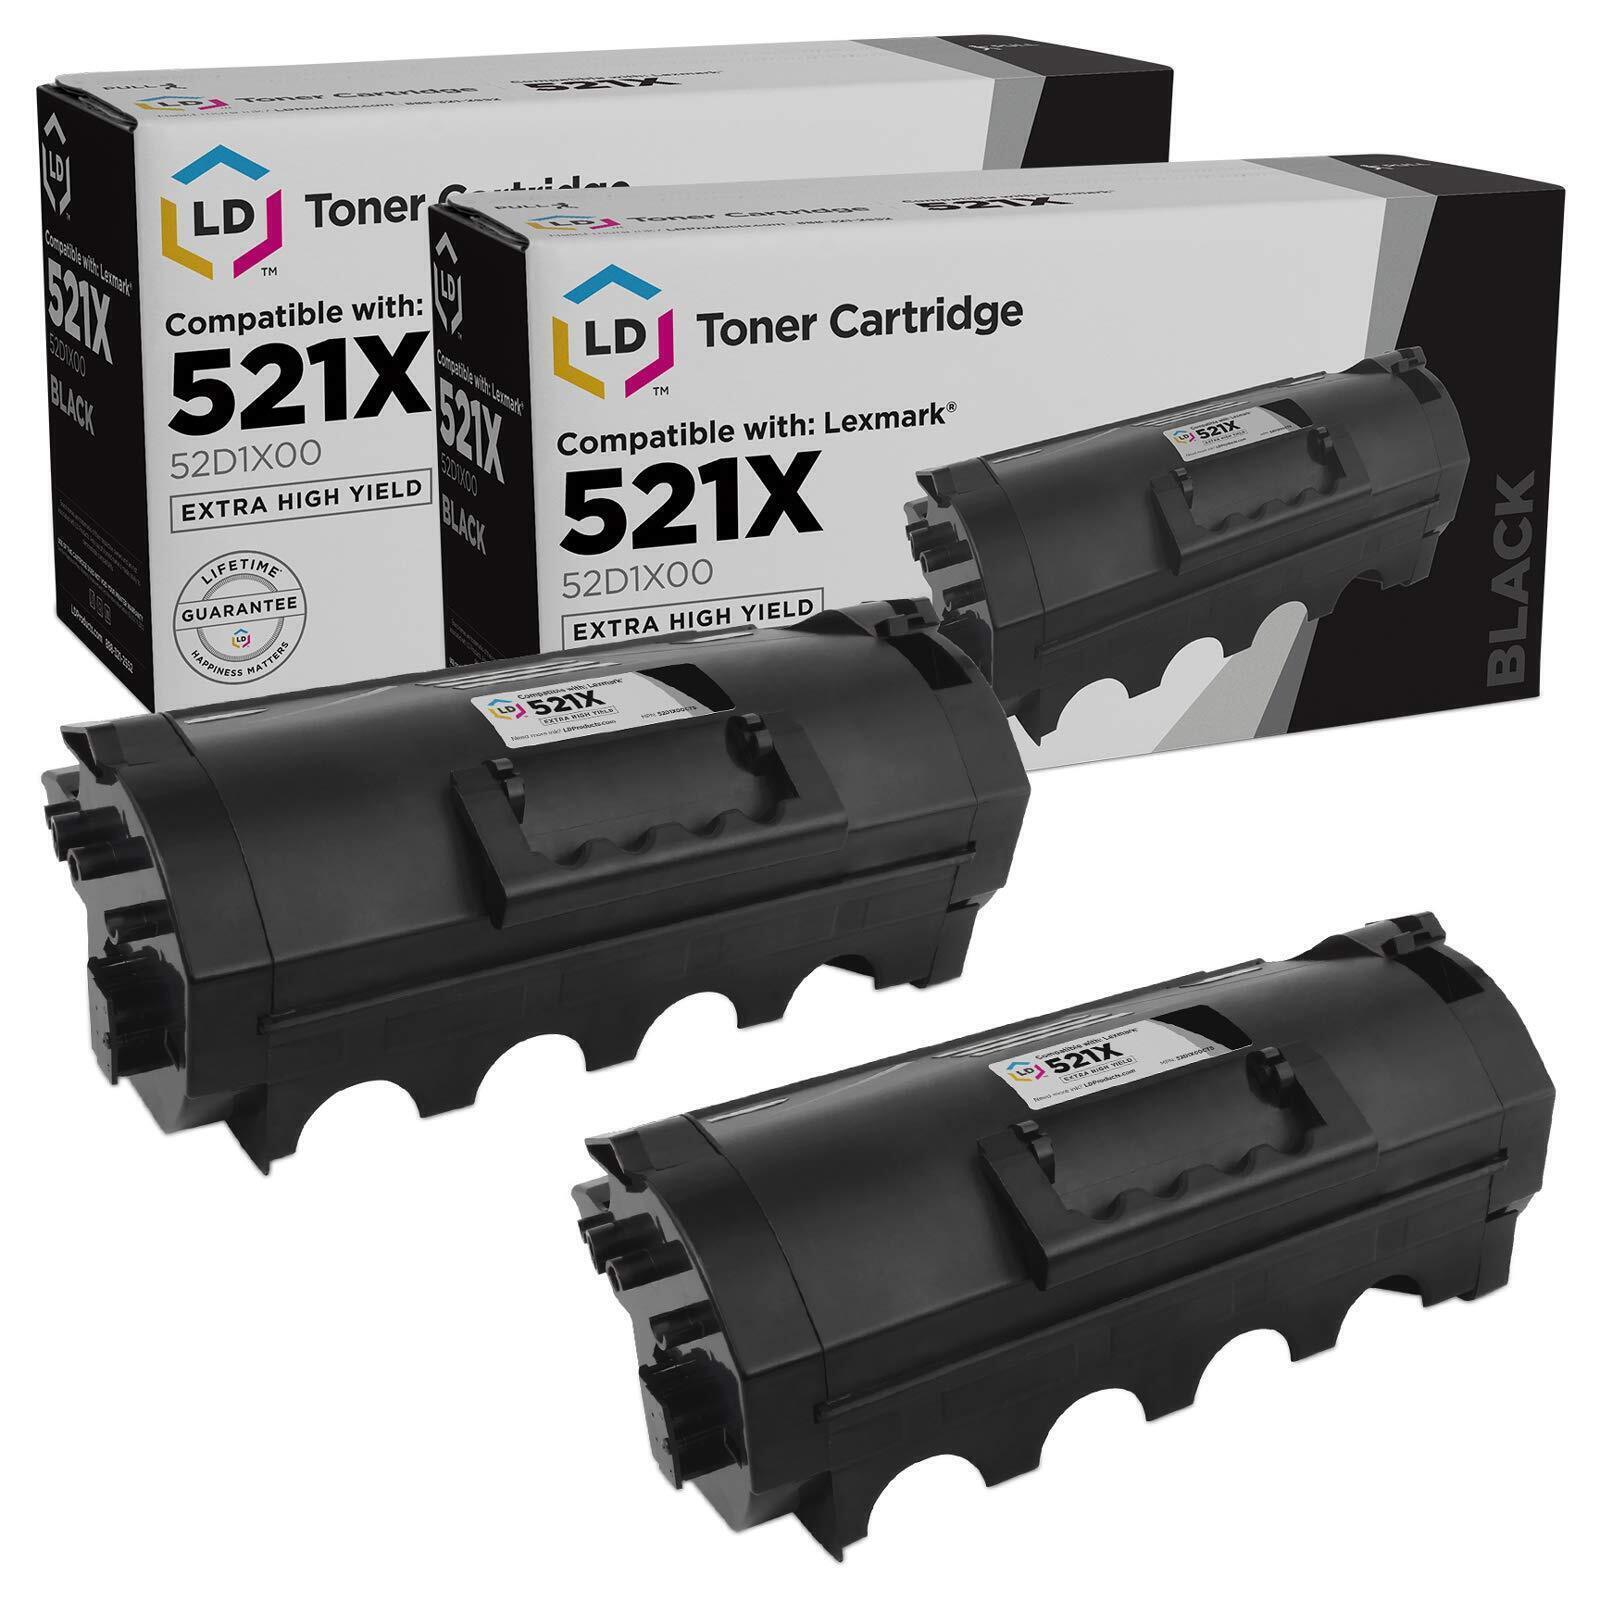 LD Compatible Lexmark 52D1X00 / 521X 2pk EHY BLK Tonerss for MS811/MS812 Series